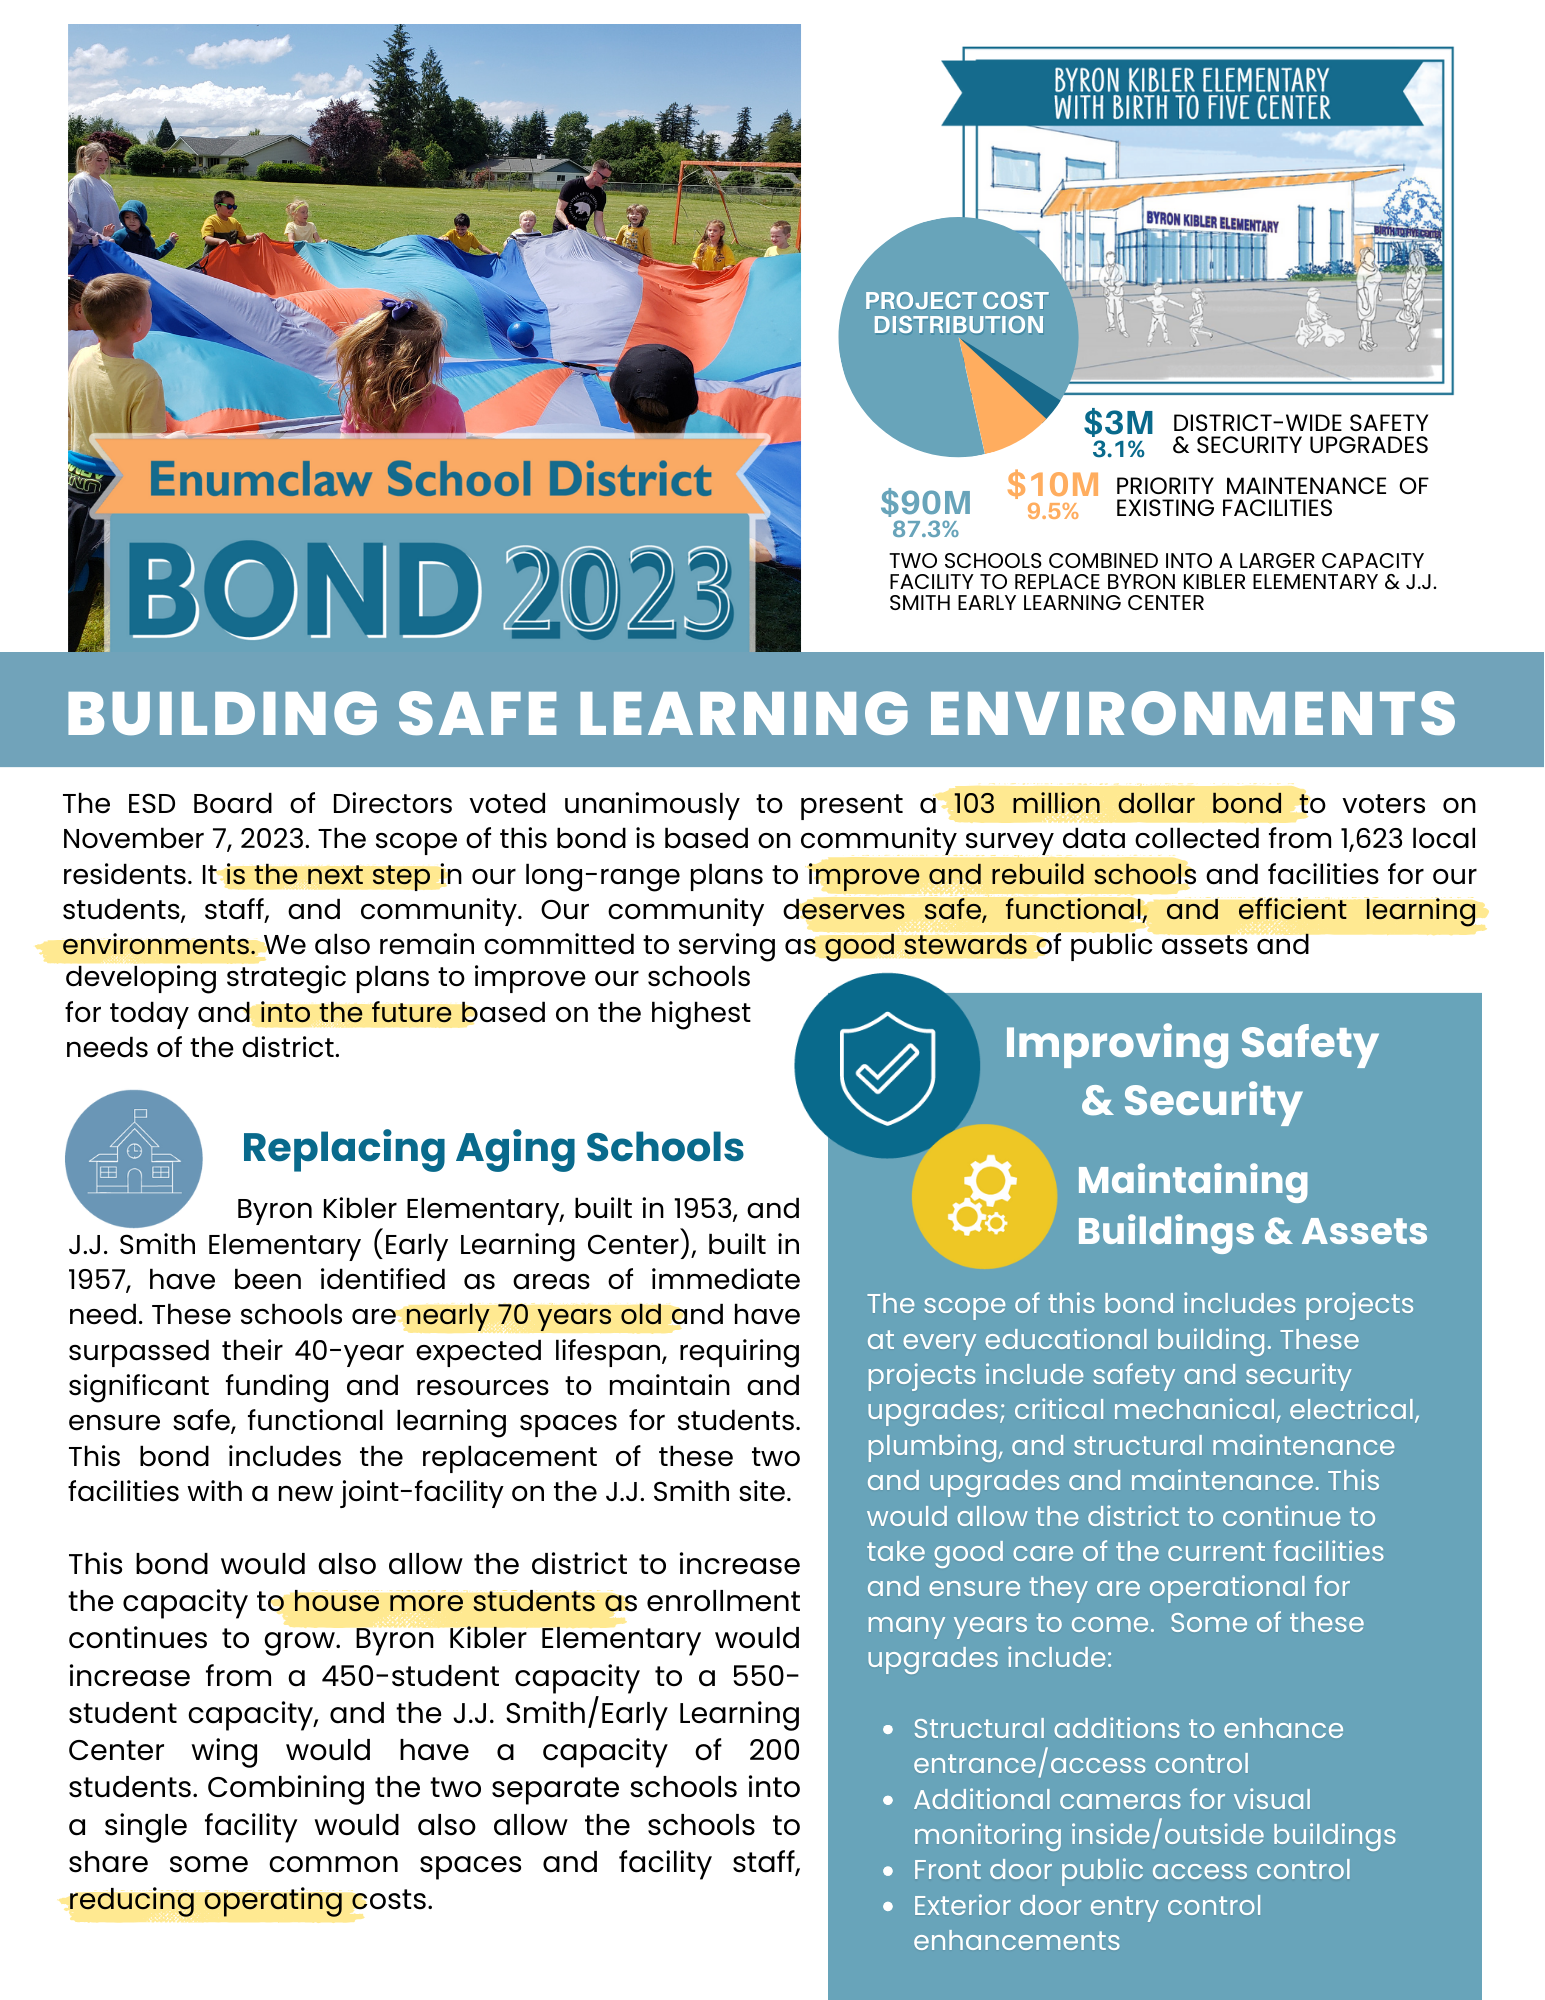 Screenshots of page 1 of Bond Informational Flyer